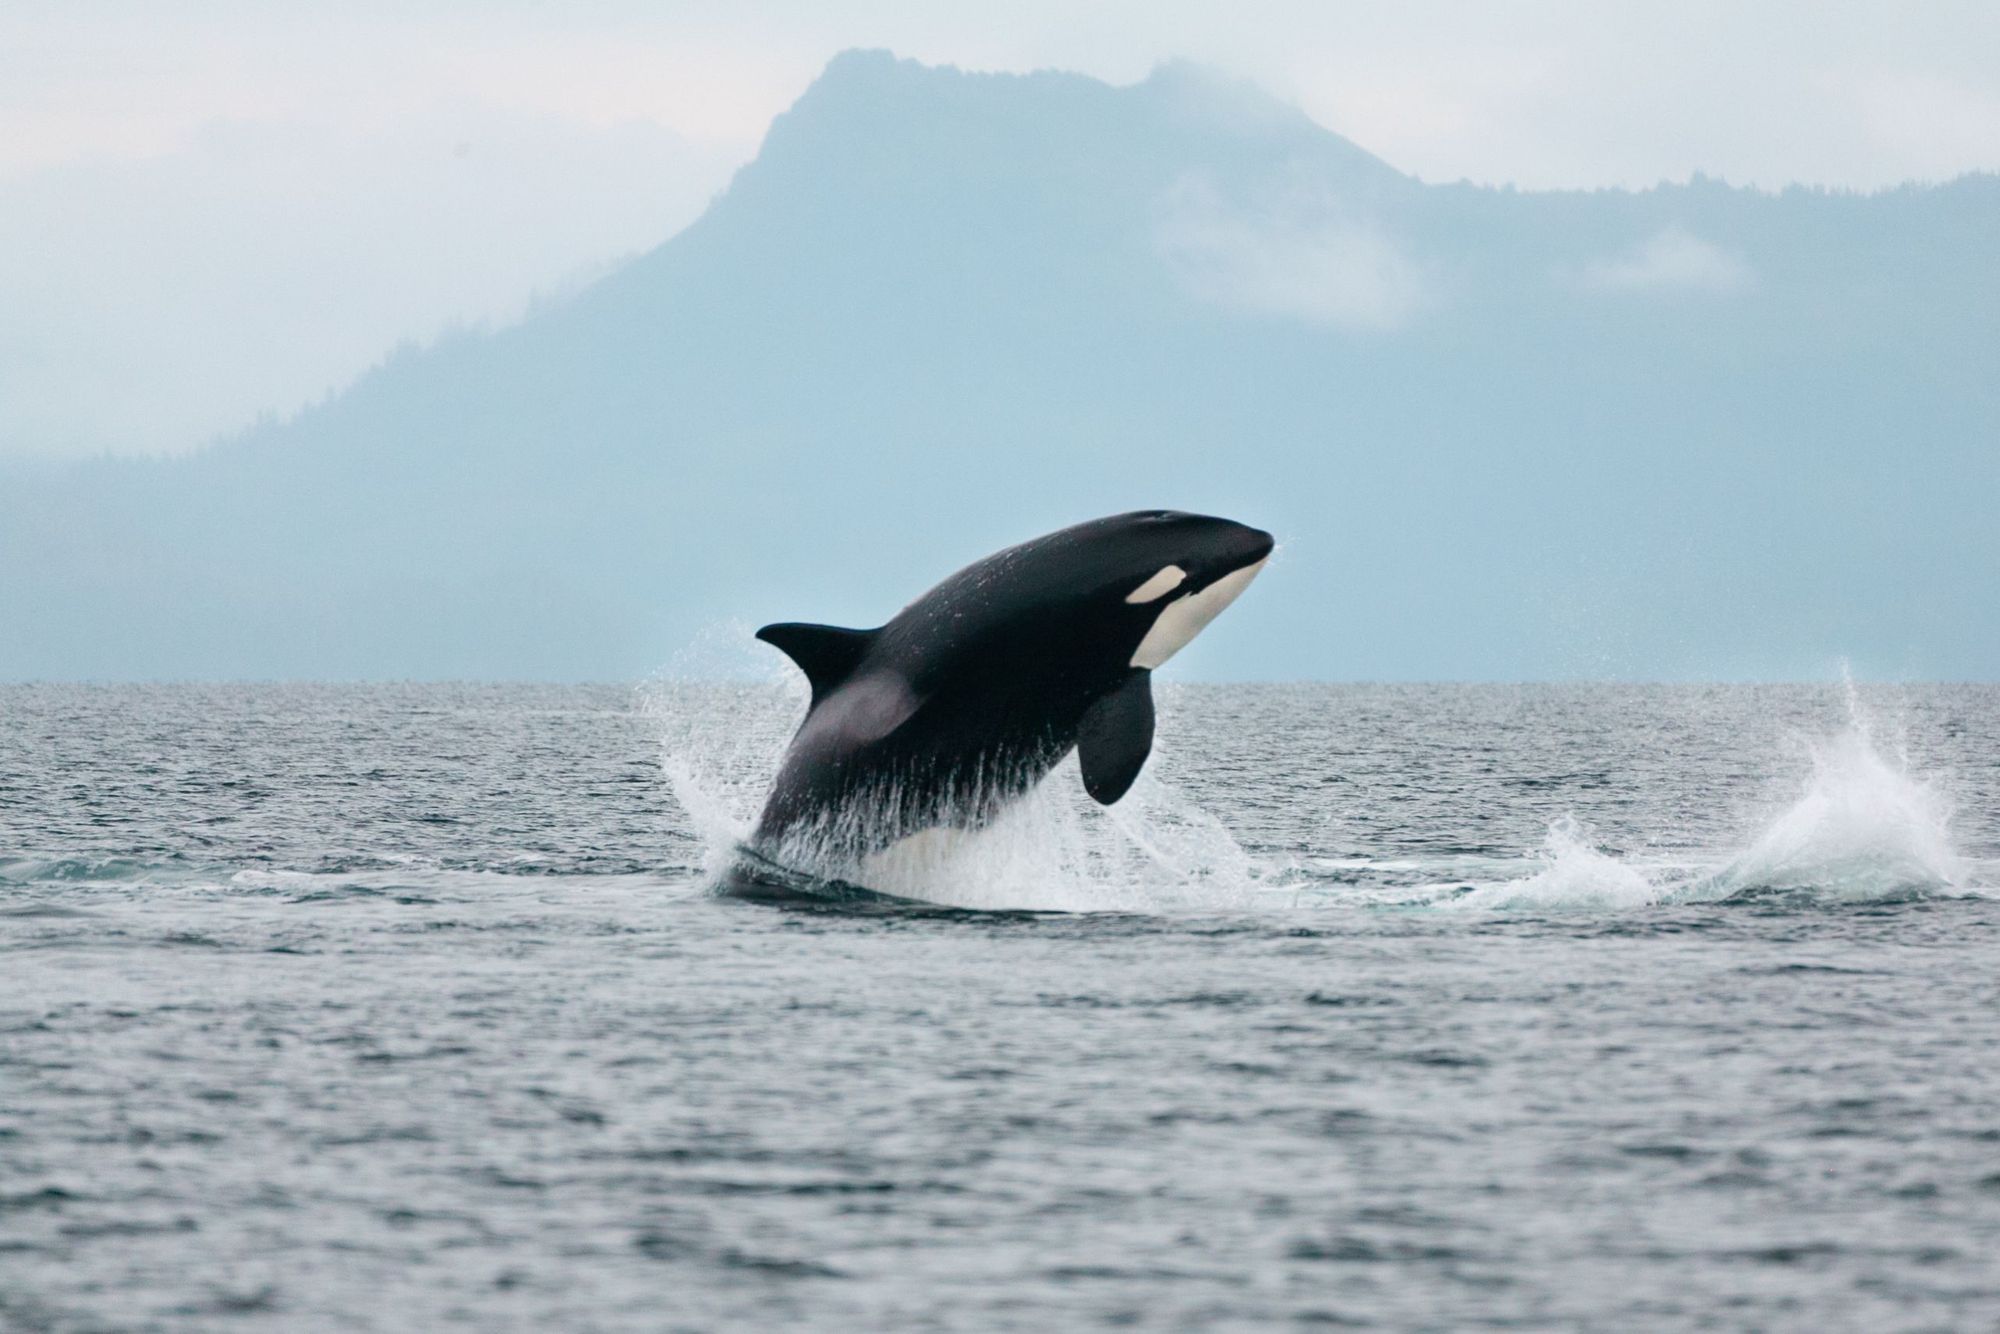 An orca, or killer whale, jumps out the water off the coast of Norway. Photo: Getty